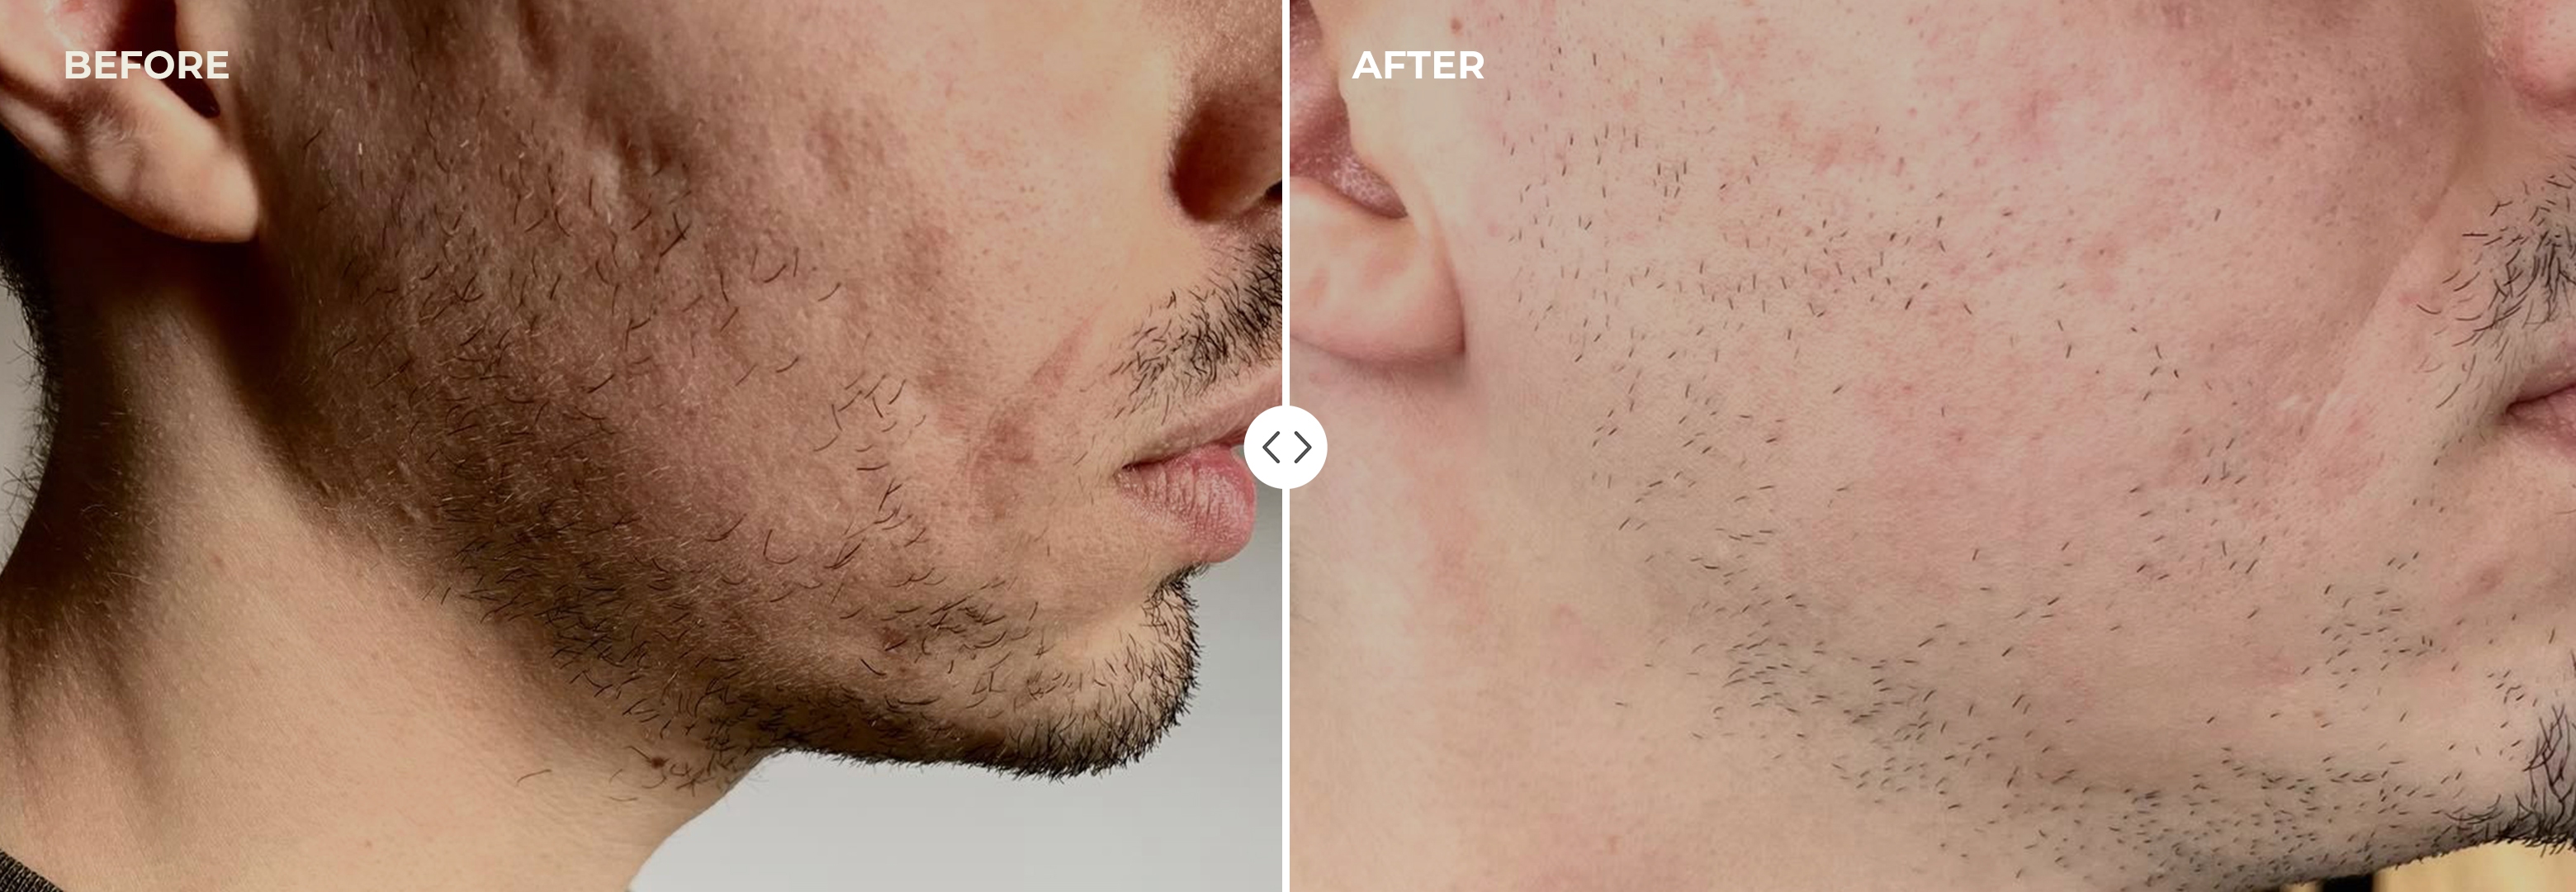 Before and After laser treatment of face scar